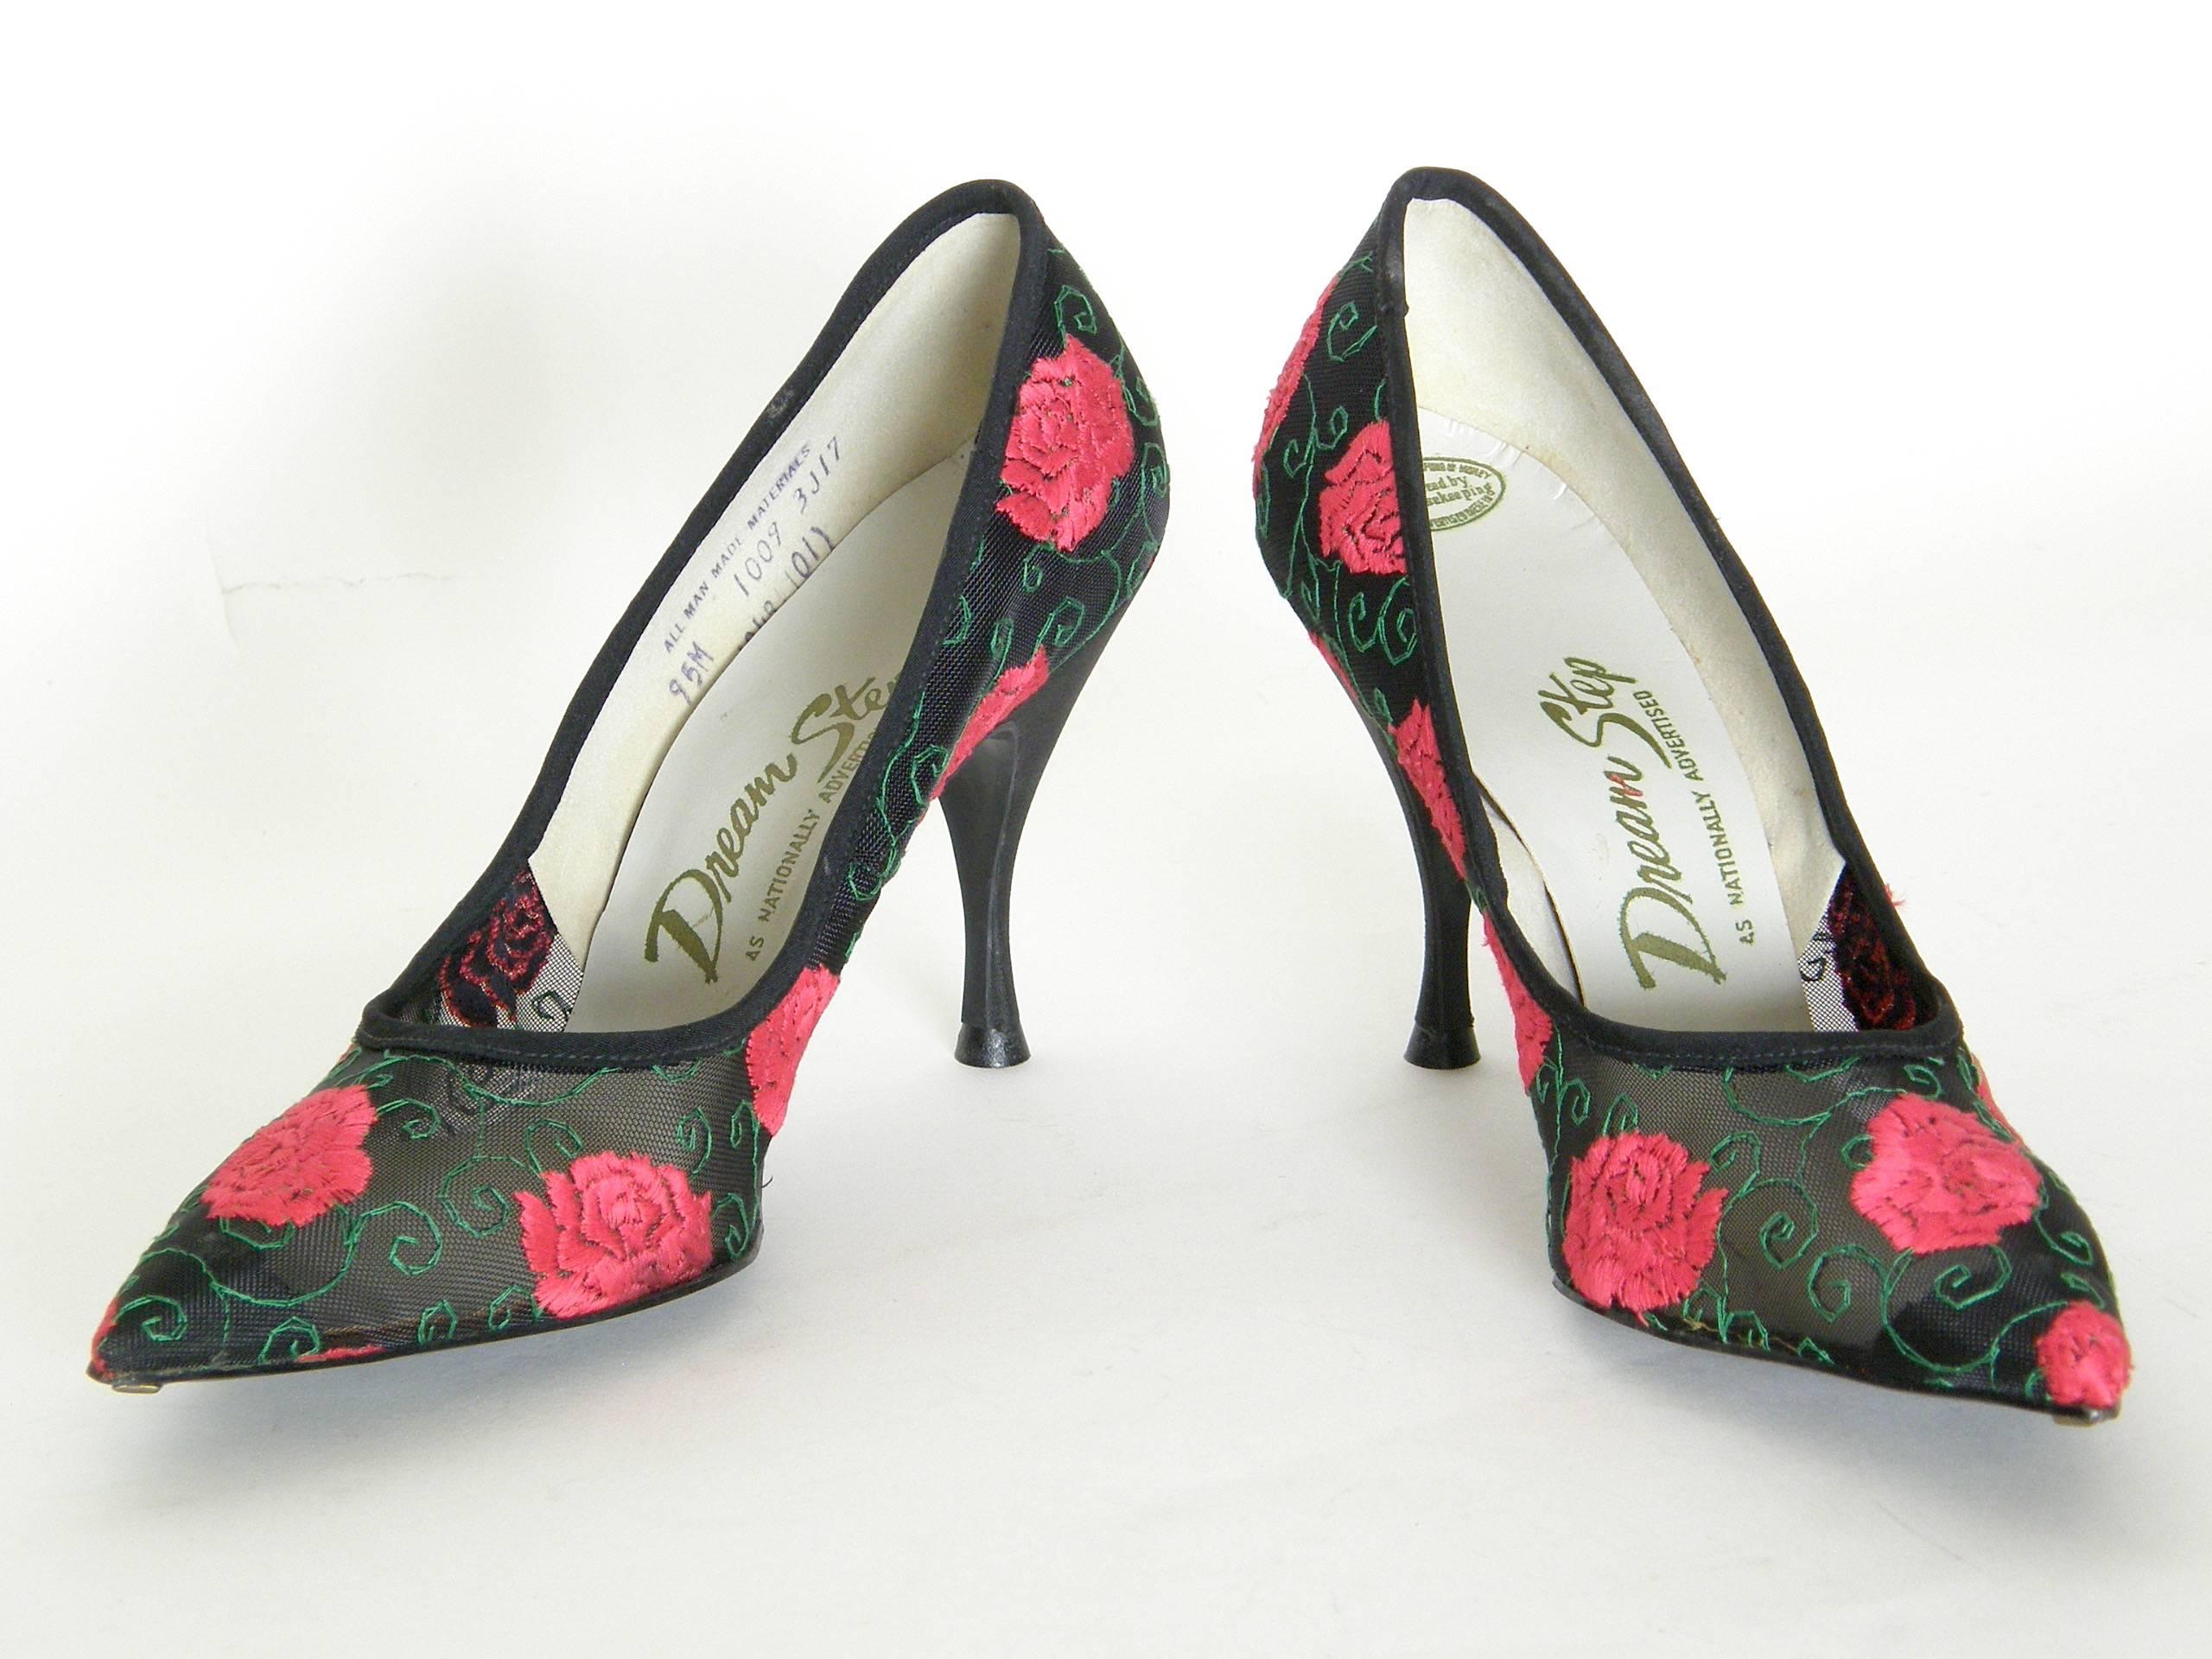 These gorgeous pumps have a classic style of the 1950s with elegant lines and pointy toes. Their shapely stiletto heels are black faille, and the body of the shoe is black mesh covered with embroidered red roses and scrolling green lines (like